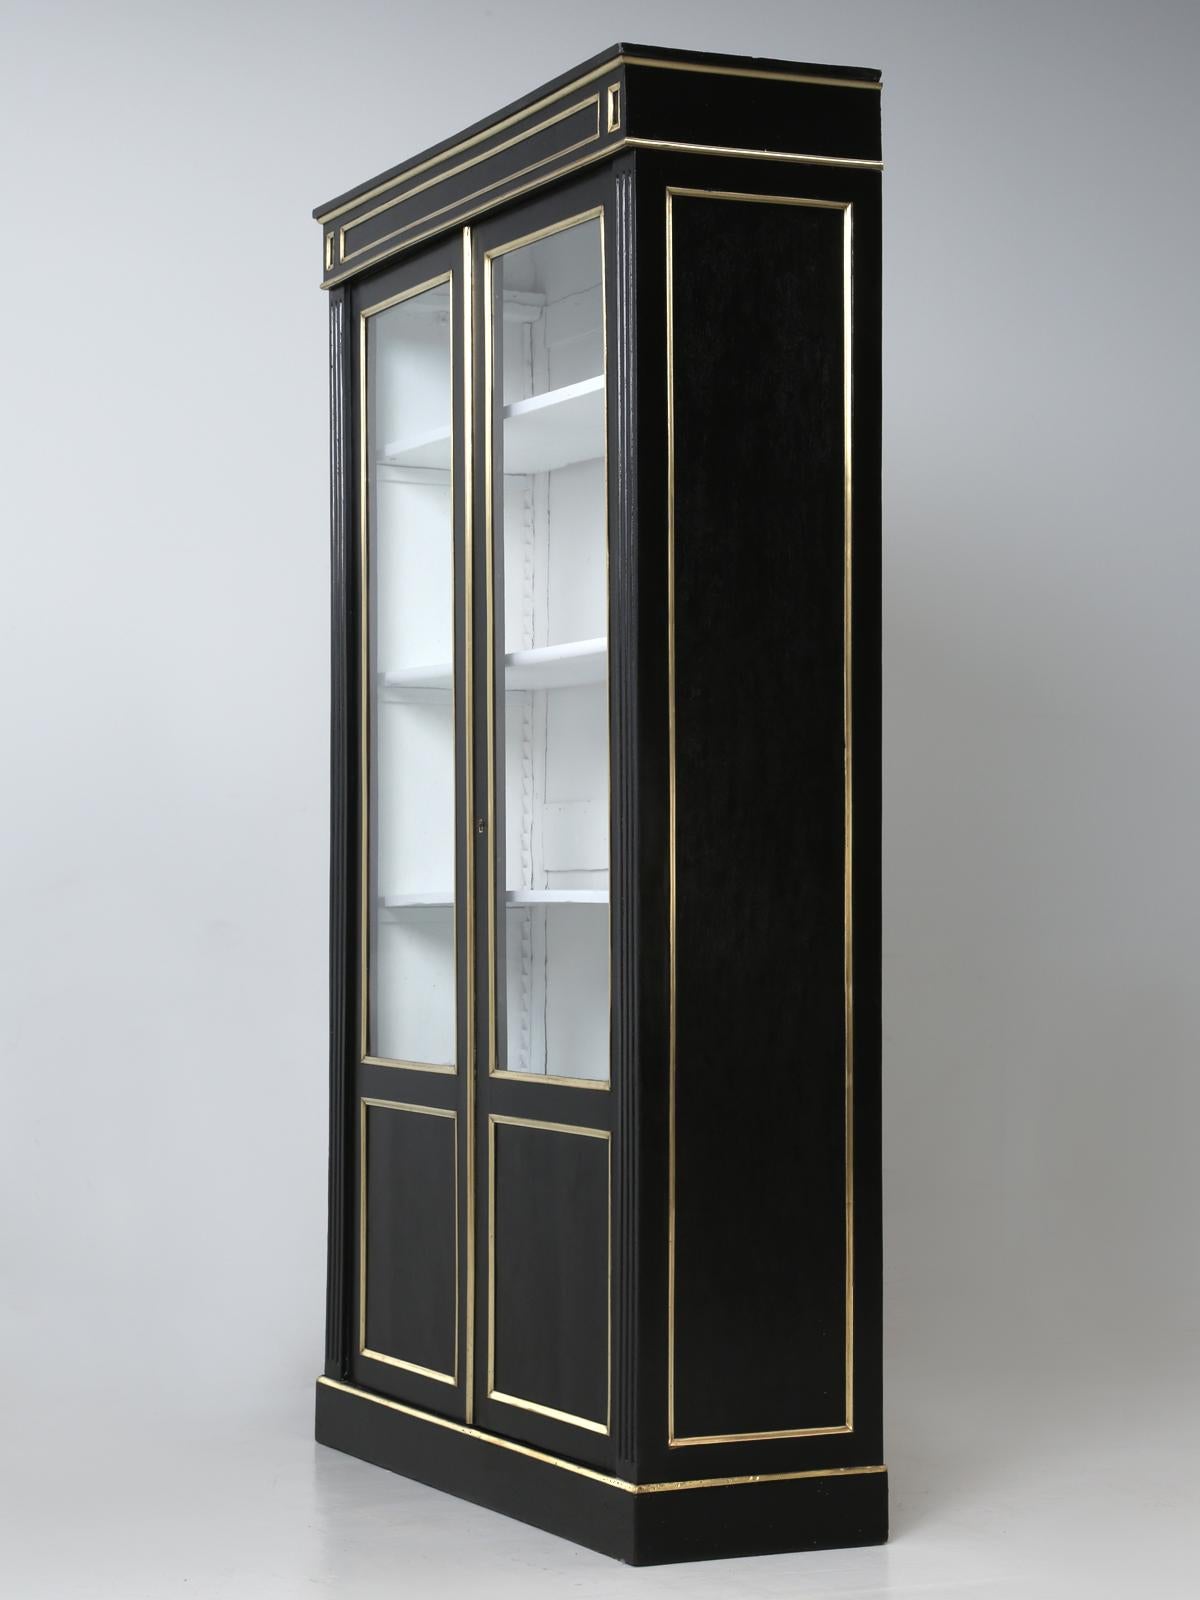 Antique French Louis XVI ebonized Bibliotheque or bookcase, that our Old Plank workshop has painstakingly disassembled and stripped by hand, with no harsh chemicals down to the bare mahogany. Likewise, each brass component was removed and cleaned